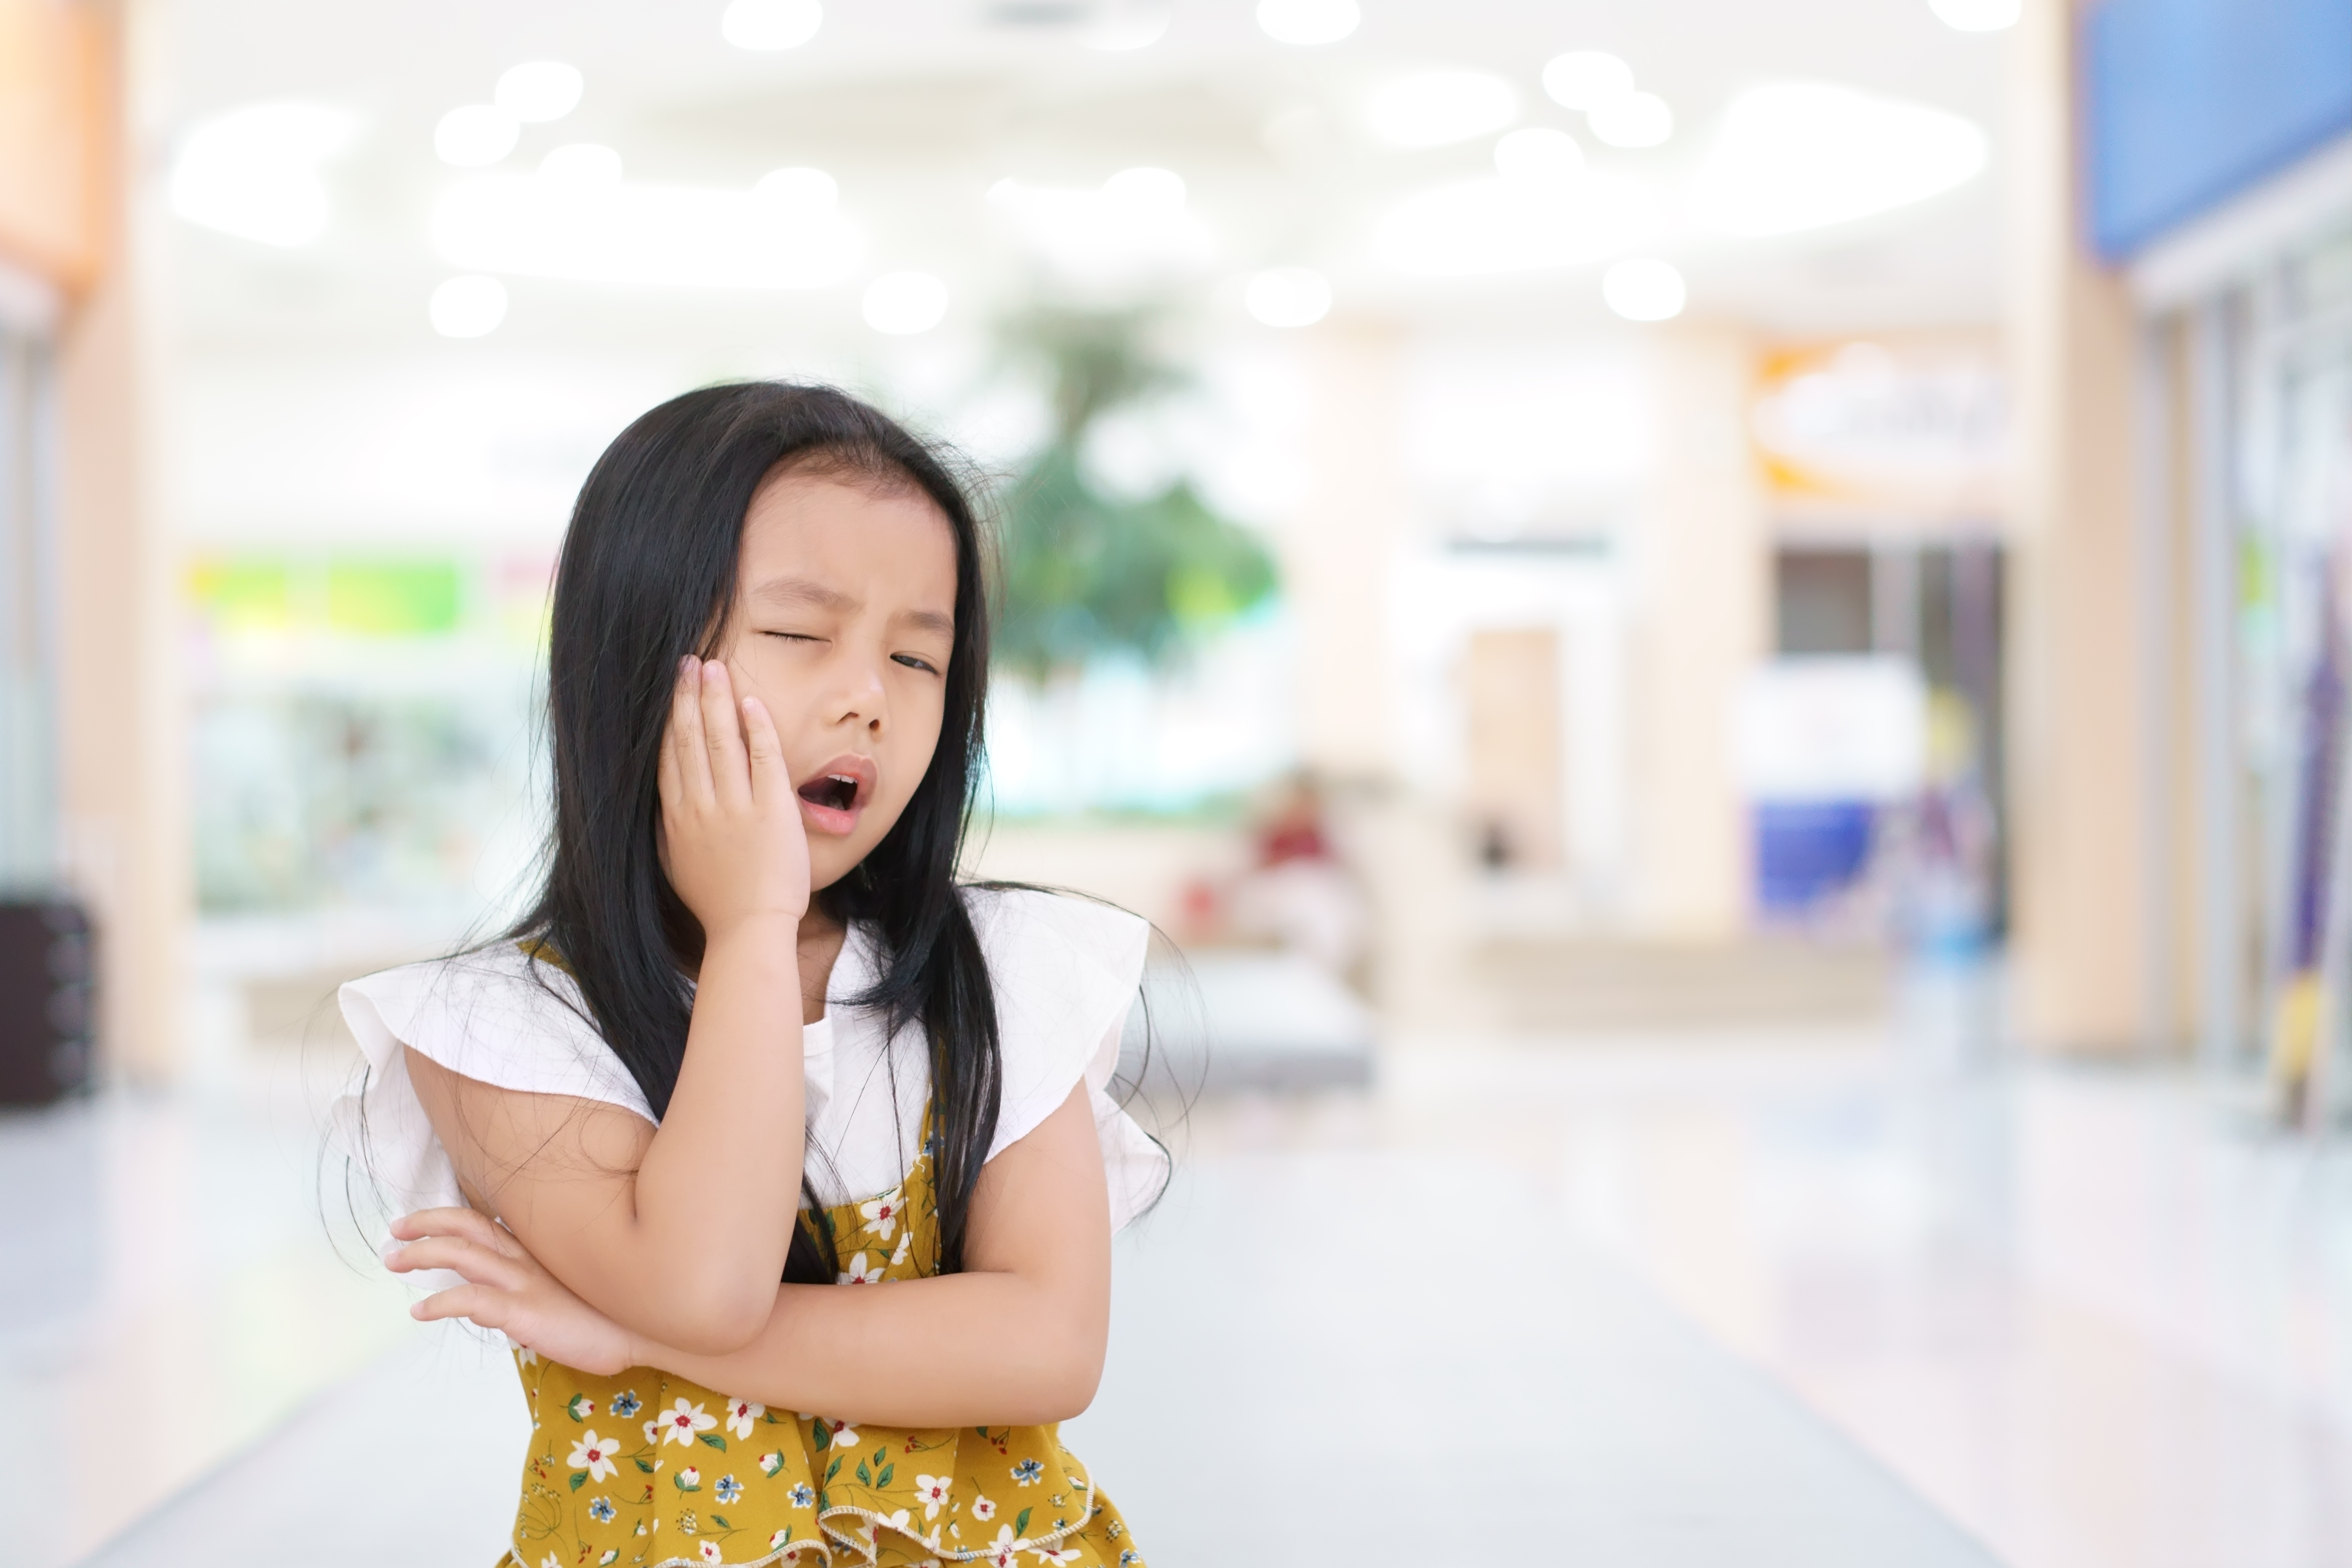 What are the causes of tooth decay in 4-year-old children?